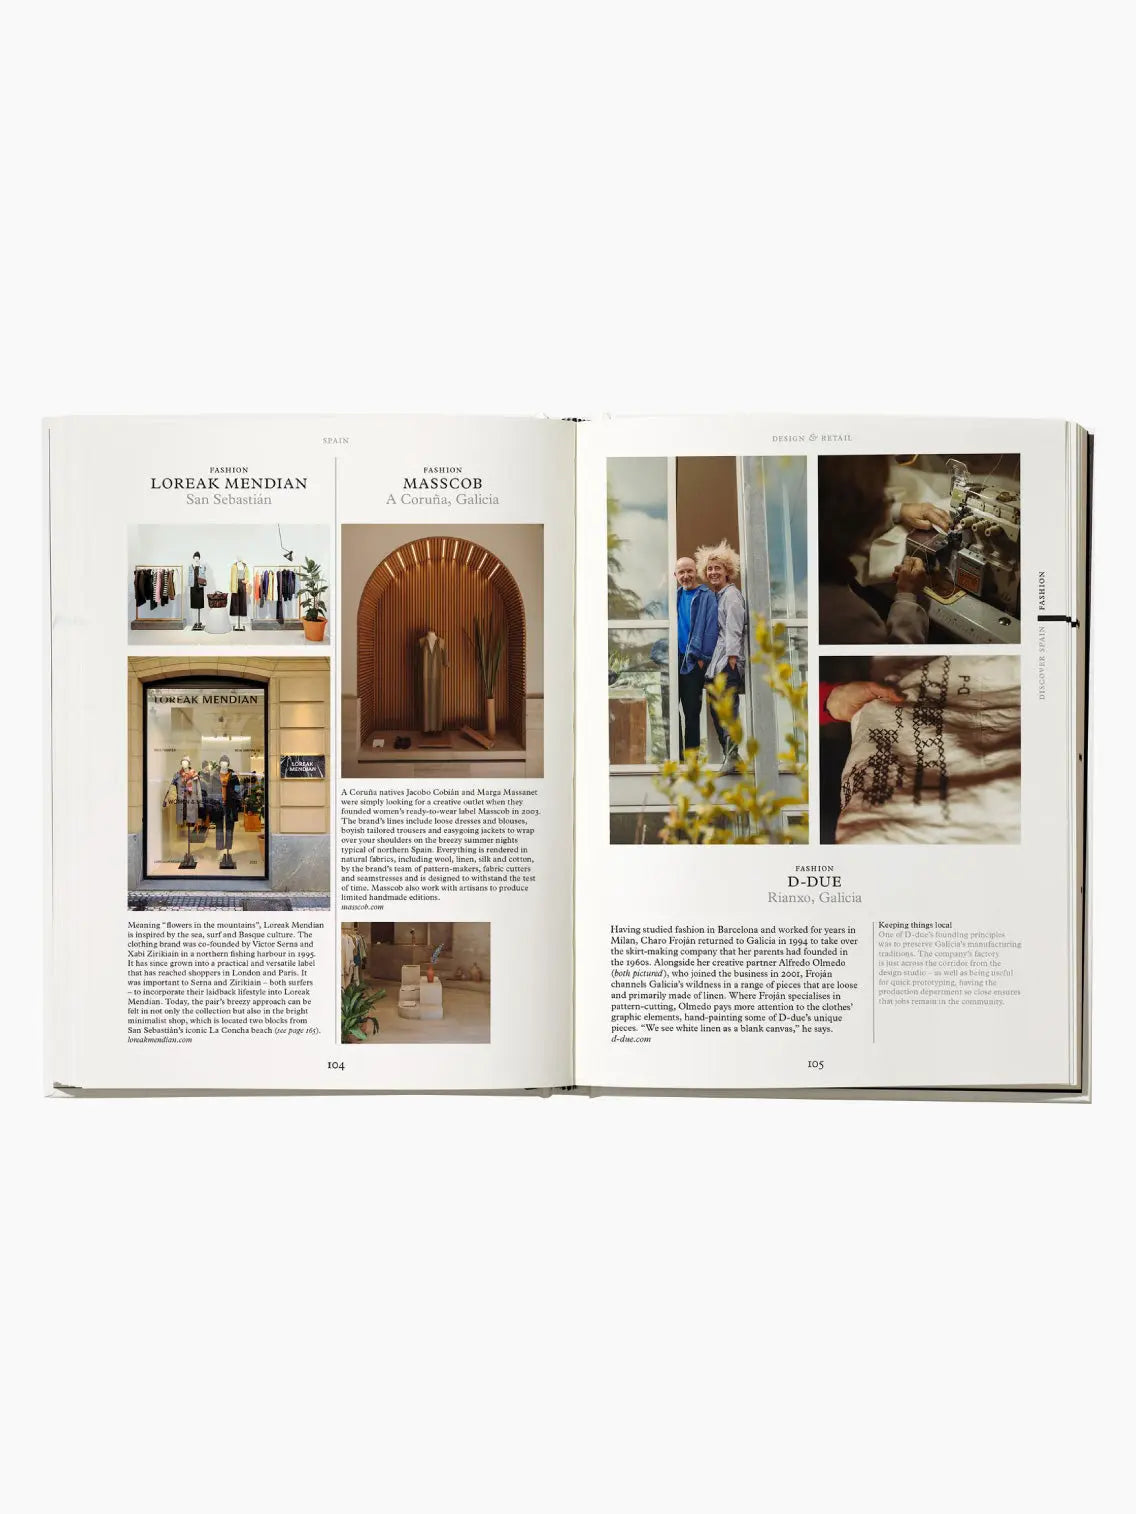 The cover of "Spain: The Monocle Handbook" showcases a modern architectural building in Barcelona with arches and a plate of shrimp paired with a glass of beer. Text on the cover reads, "Hotels, food, design: rediscover Spain with this insightful guide from Monocle.